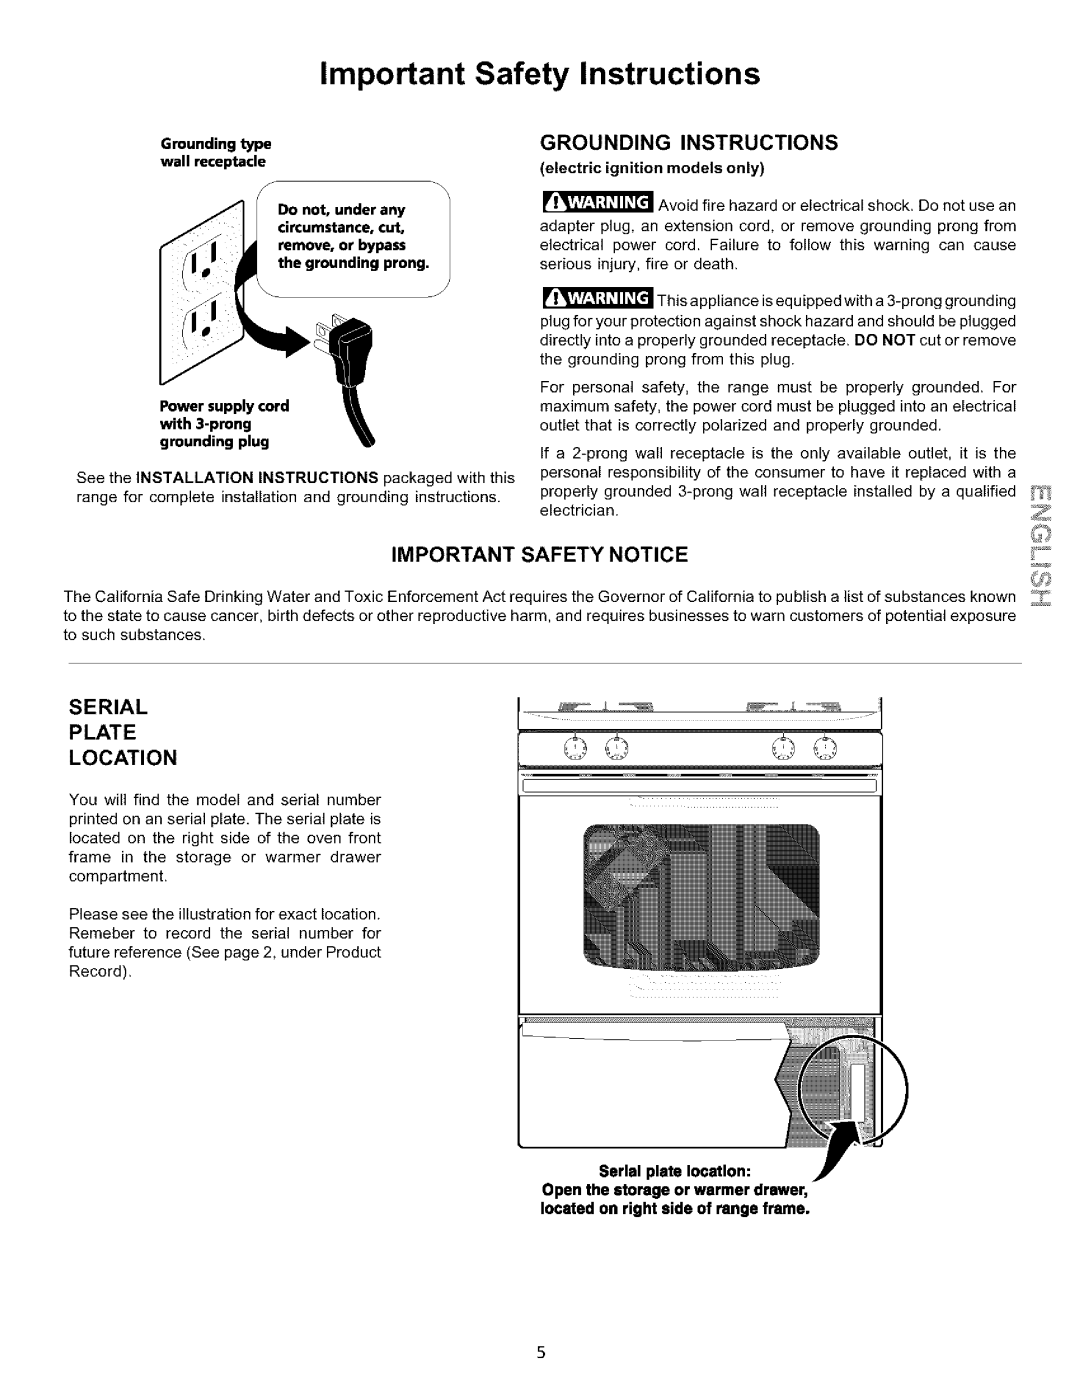 Kenmore 790.75602 Important Safety Instructions, Grounding Instructions, Important Safety Notice, Serial Plate Location 